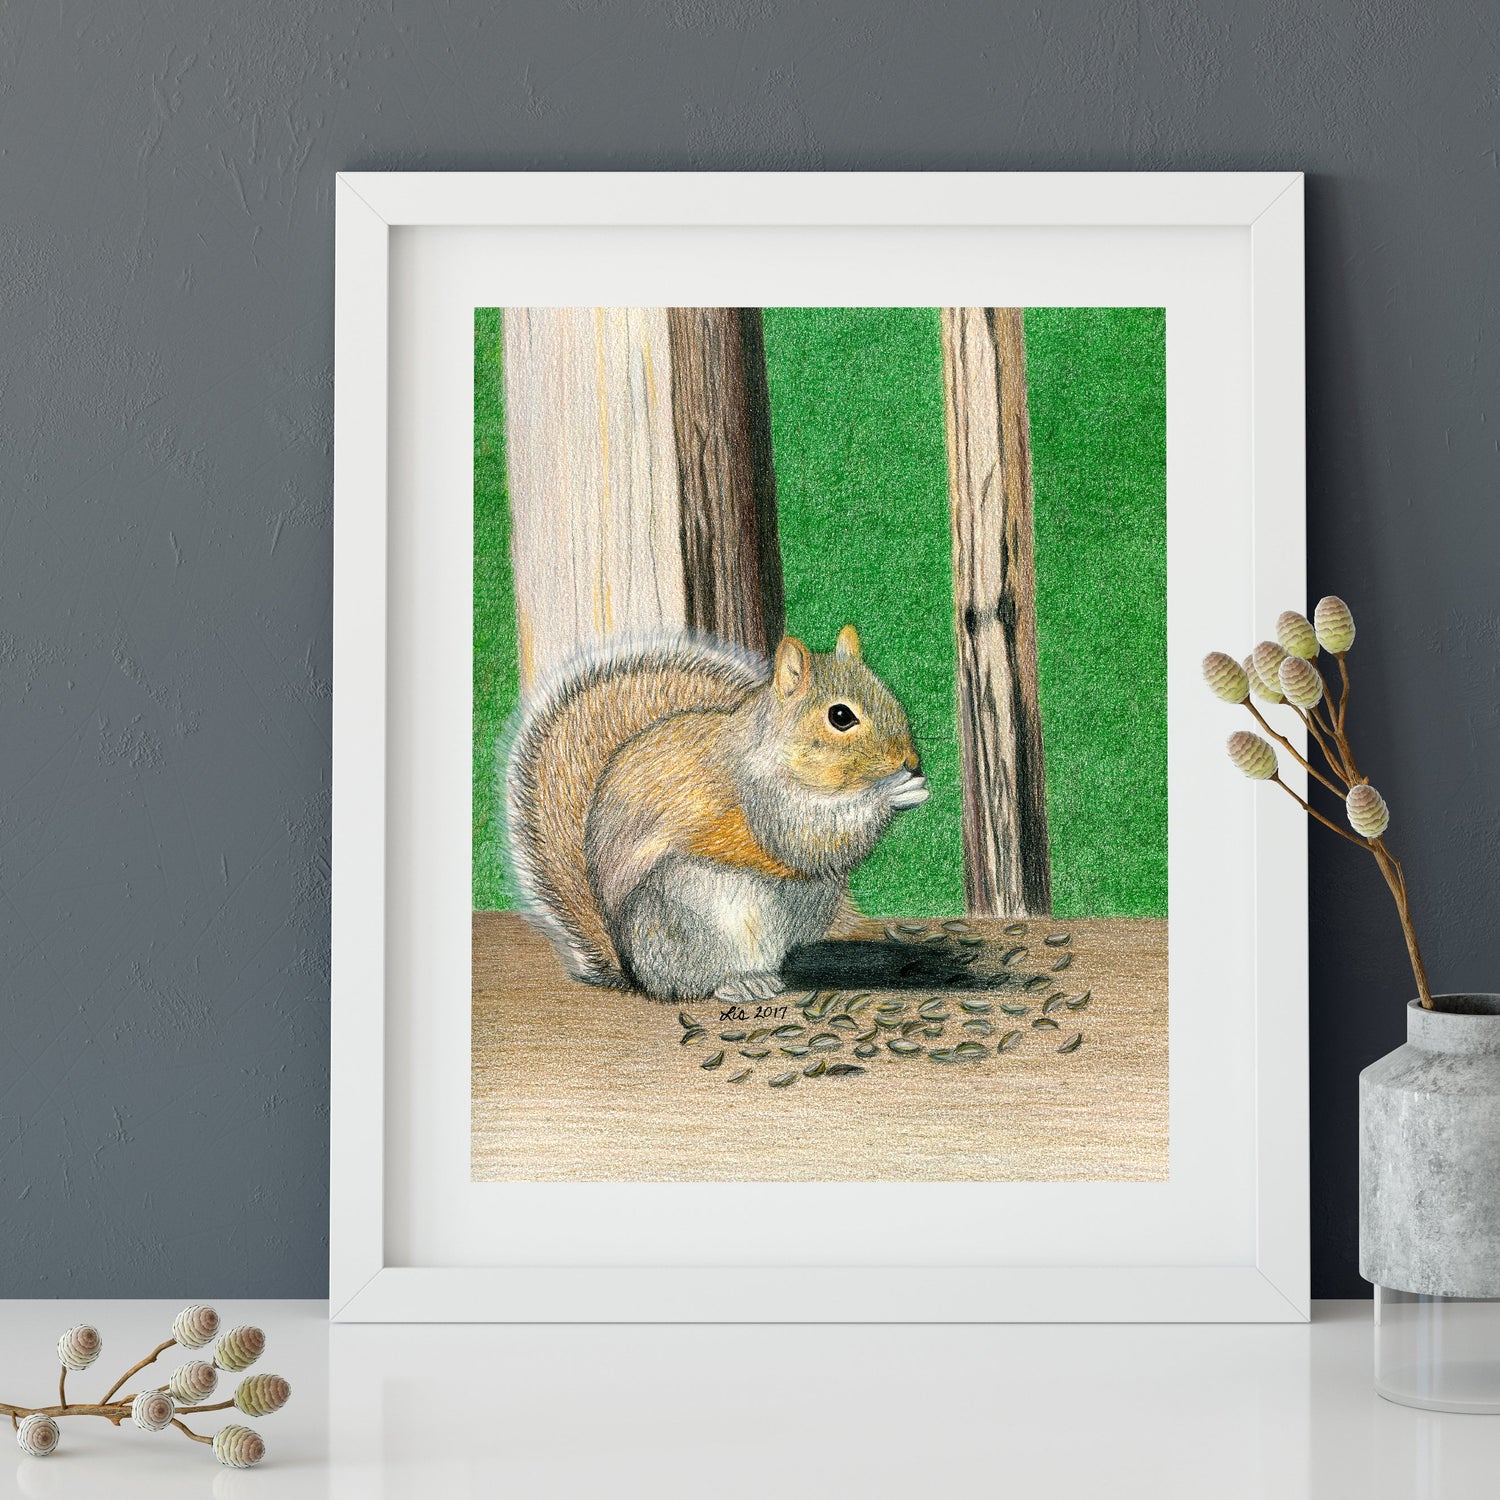 Framed art print of a colored pencil drawing reproduction of a squirrel eating seeds on a backyard deck.